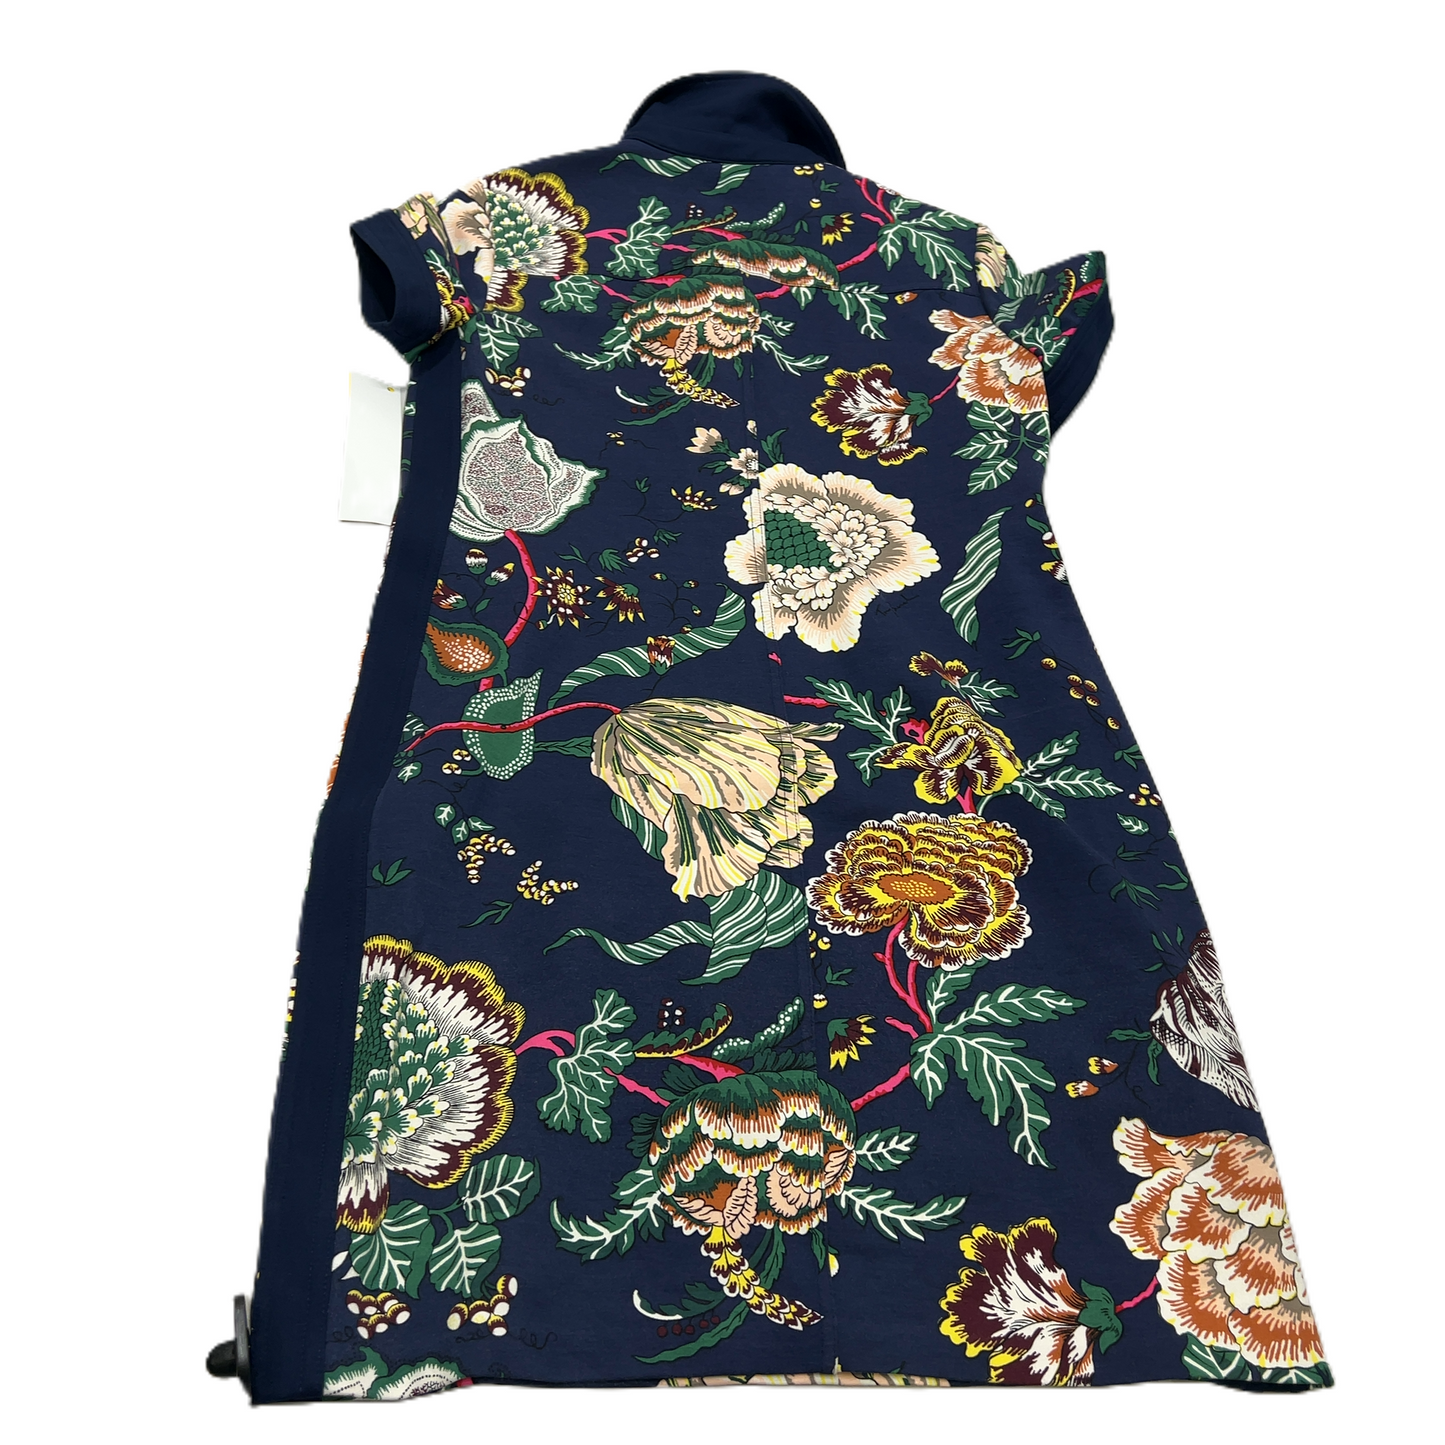 Floral Print  Dress Designer By Tory Burch  Size: S